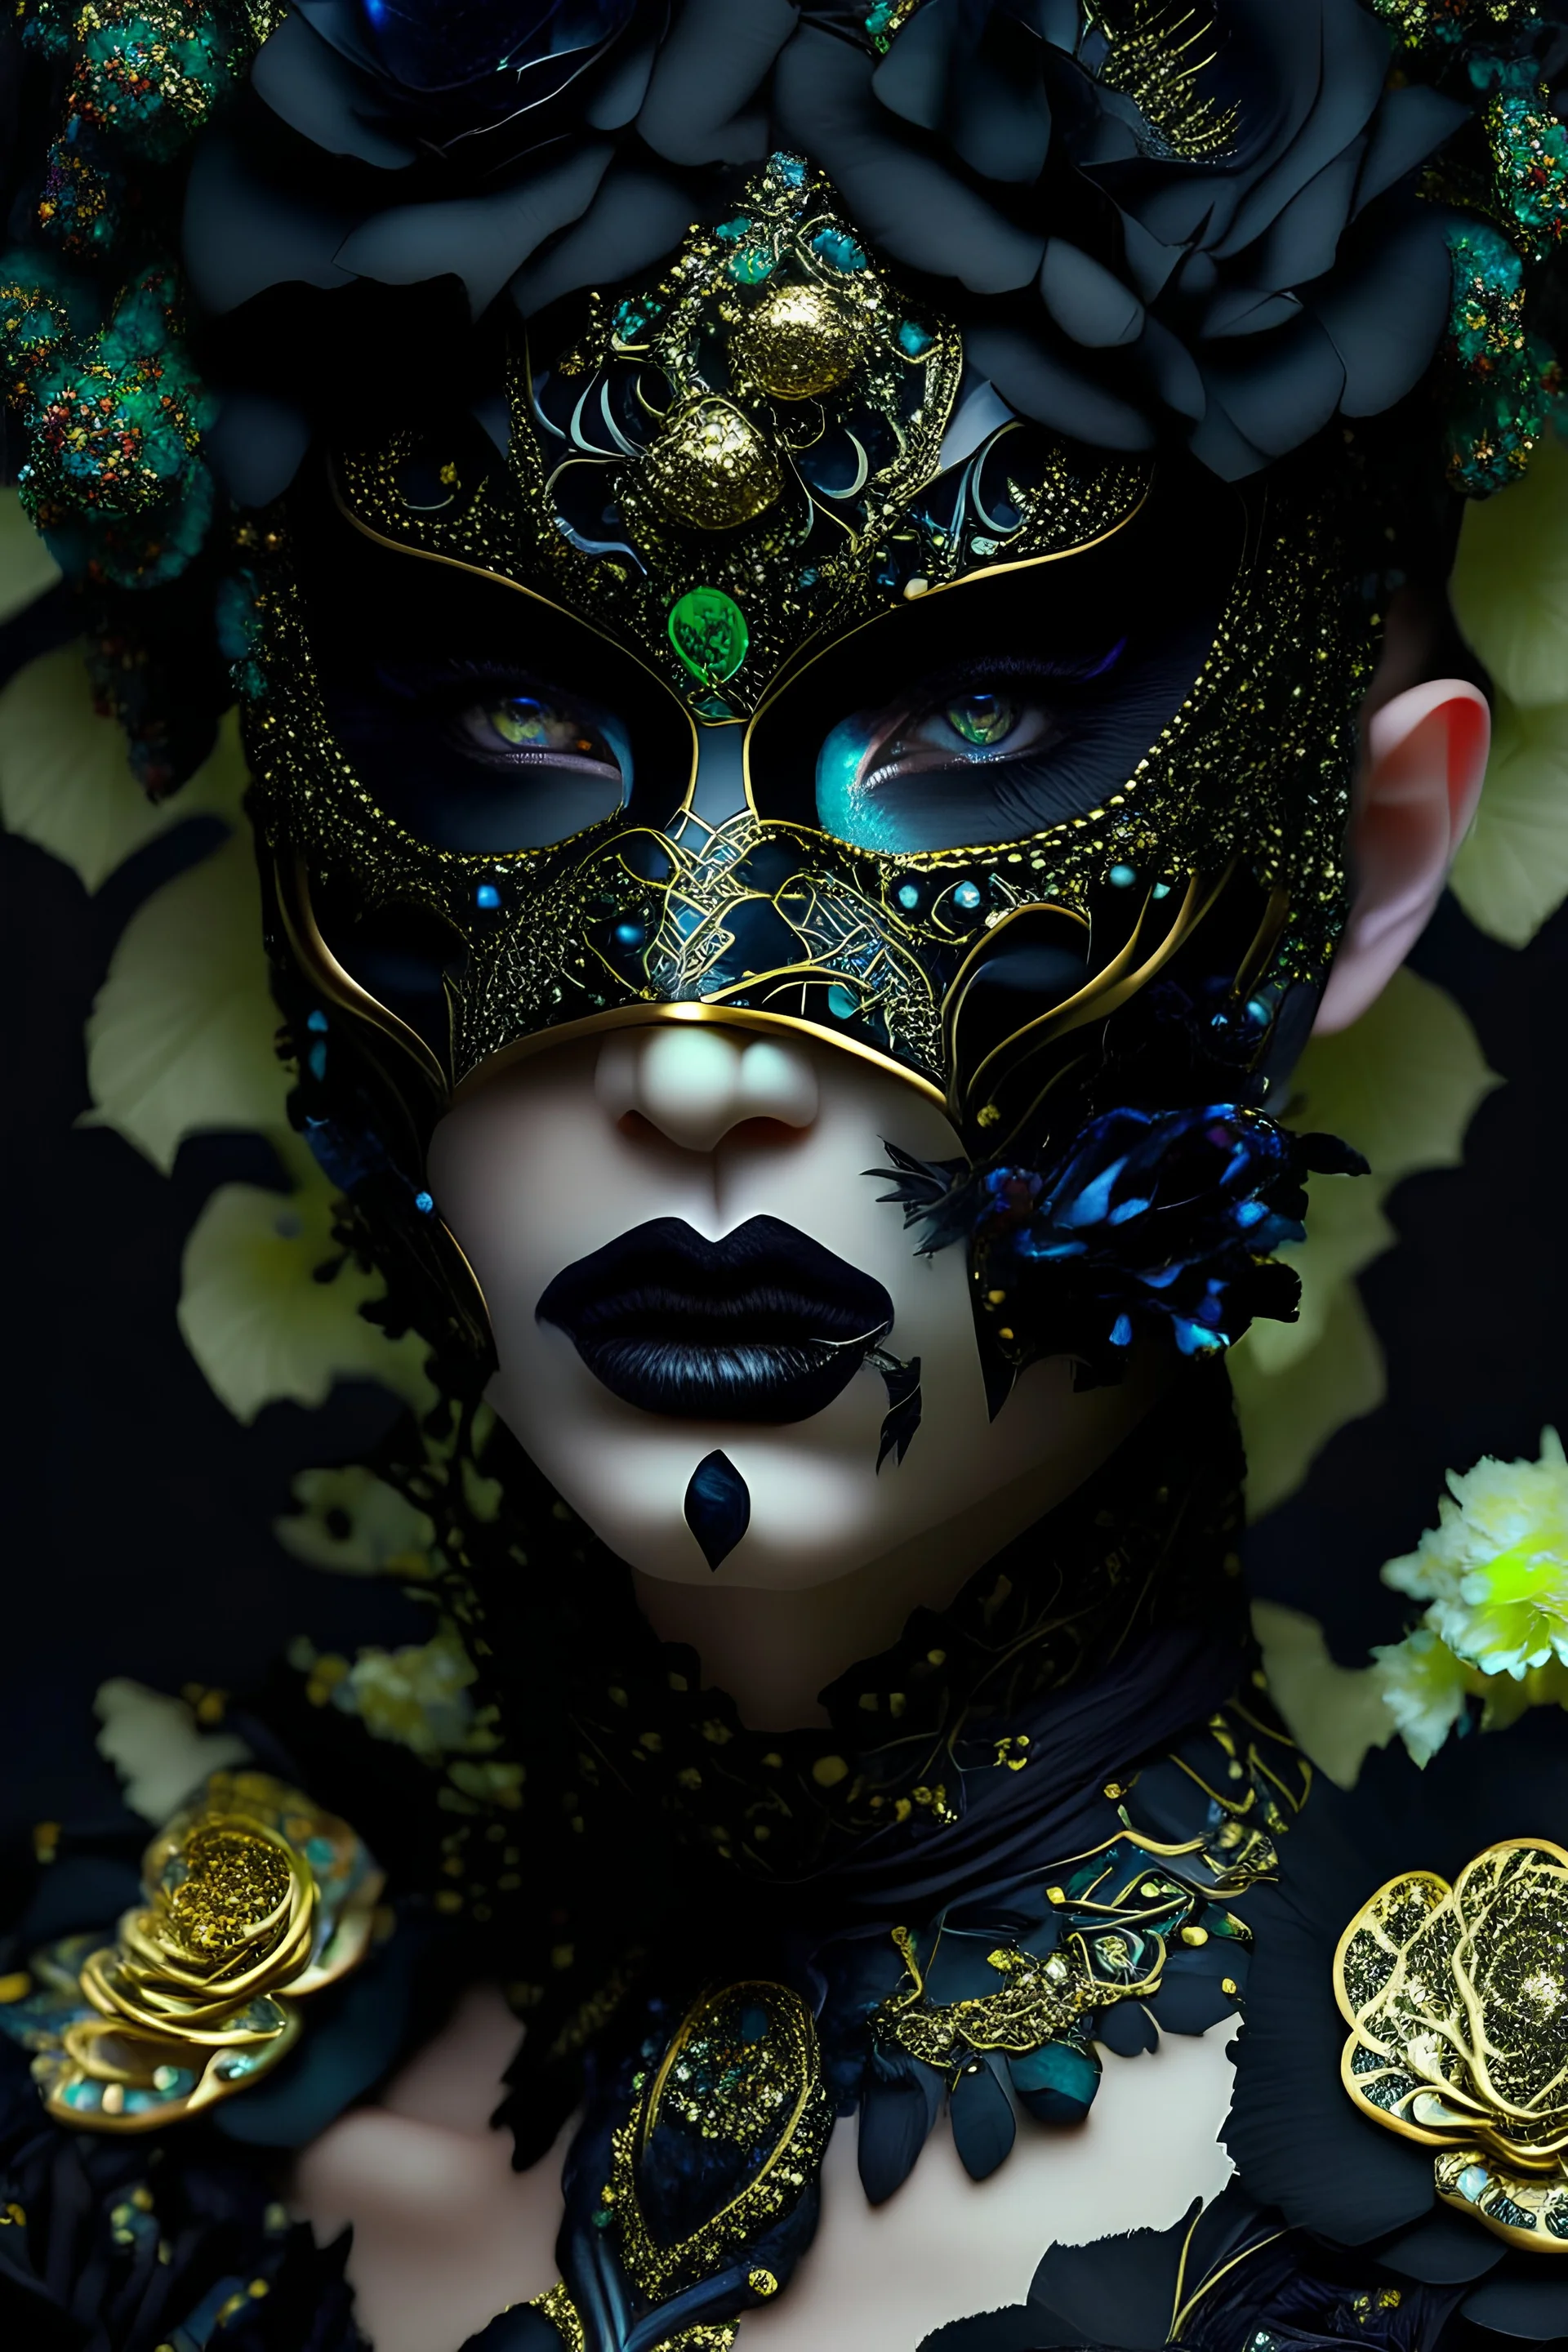 Beautiful faced young malachite ribbed face masque cyberpunk filigree decadent filippin woman, adorned with decadent black a rose deco punk and black iris,hydrangea floral yellow opal, black onix, obsidian rombus shape rmineral stone ribbed headress wearing black lace ribbed with white opal stone mineral and embossed floral costume dress, golden and white and black colour gradient Dusty makeup filigree organic bio spinal ribbed detail of gothica decadent dark cyberpunk shamanism